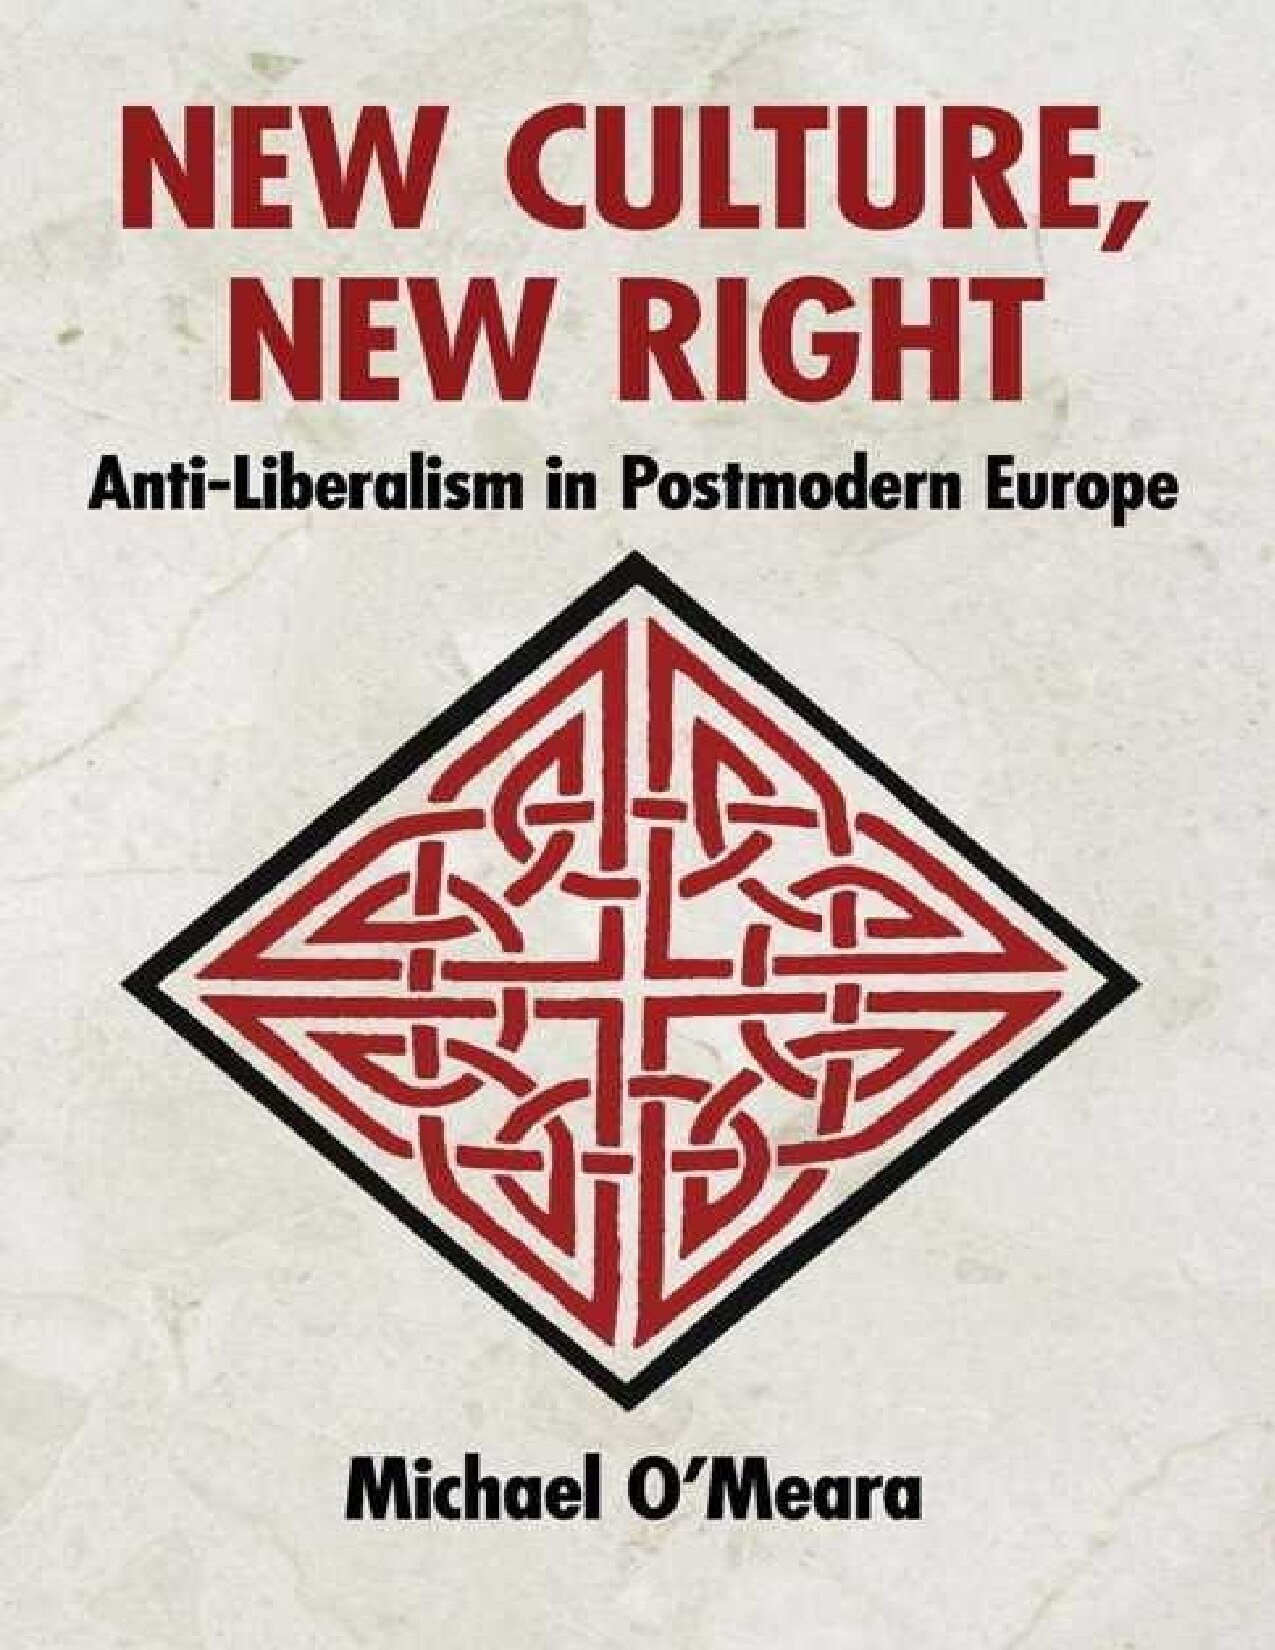 New Culture, New Right: Anti-Liberalism in Postmodern Europe